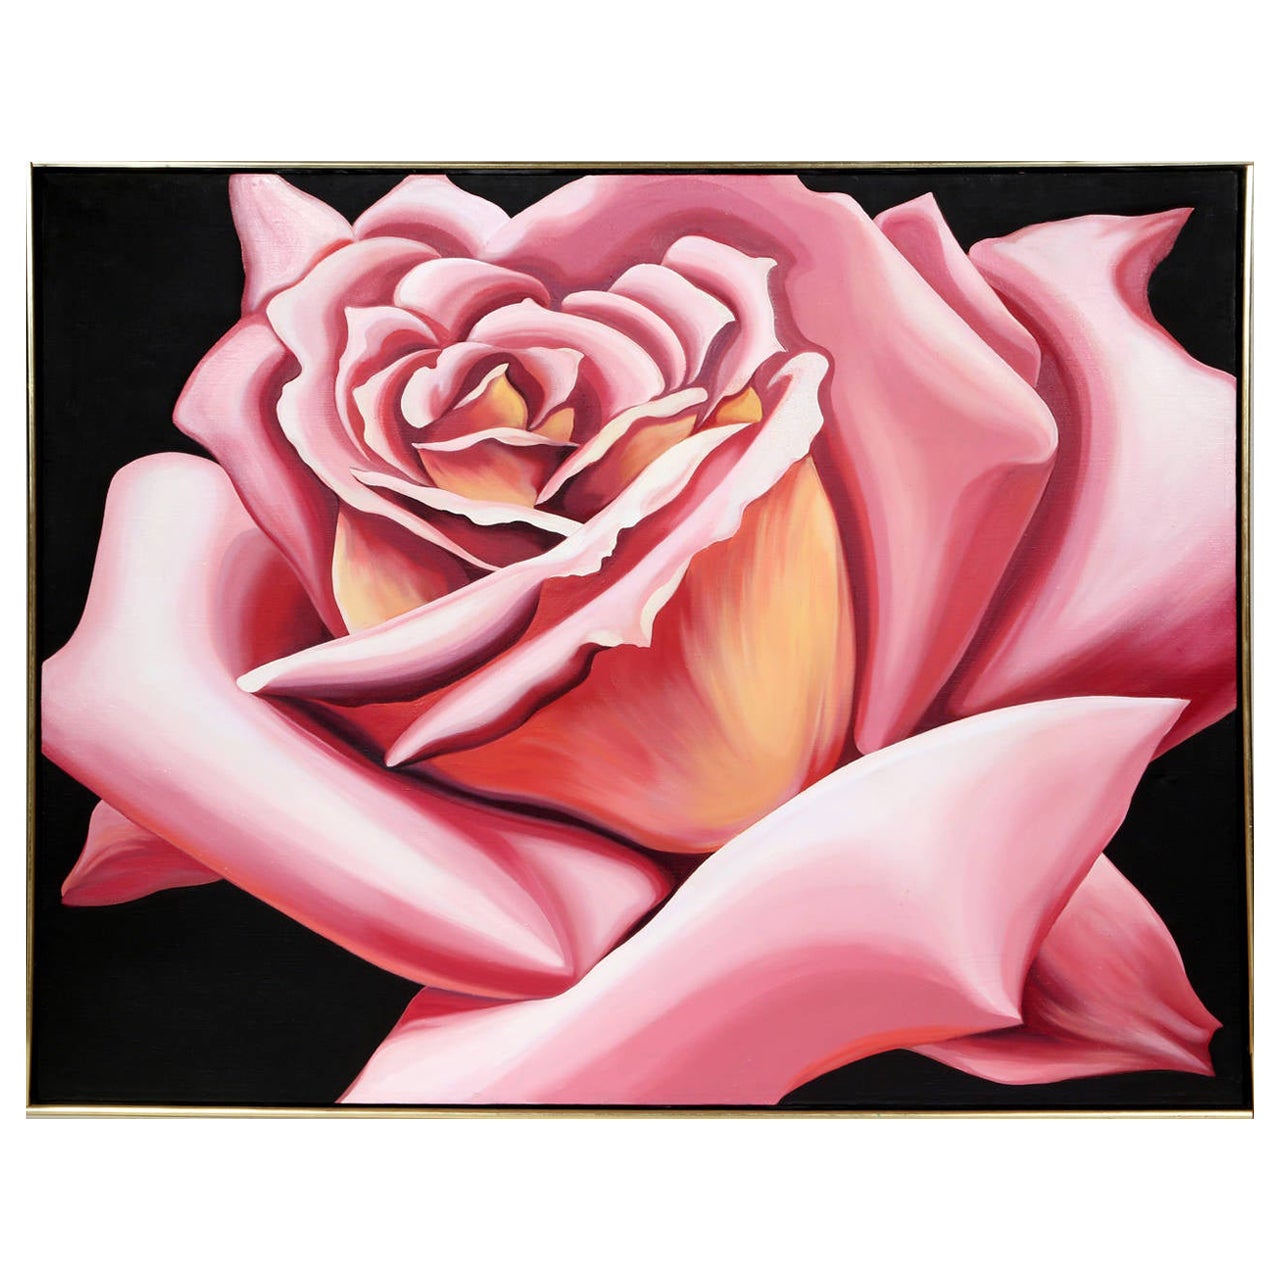 A beautiful realist painting of a rose by American Artist, Lowell Nesbitt who was great inspired by Georgia O'Keeffe.

Artist: Lowell Blair Nesbitt, American (1933 - 1993)
Title: Pink Rose
Year: 1976
Medium: Oil on Canvas, signed, titled and dated